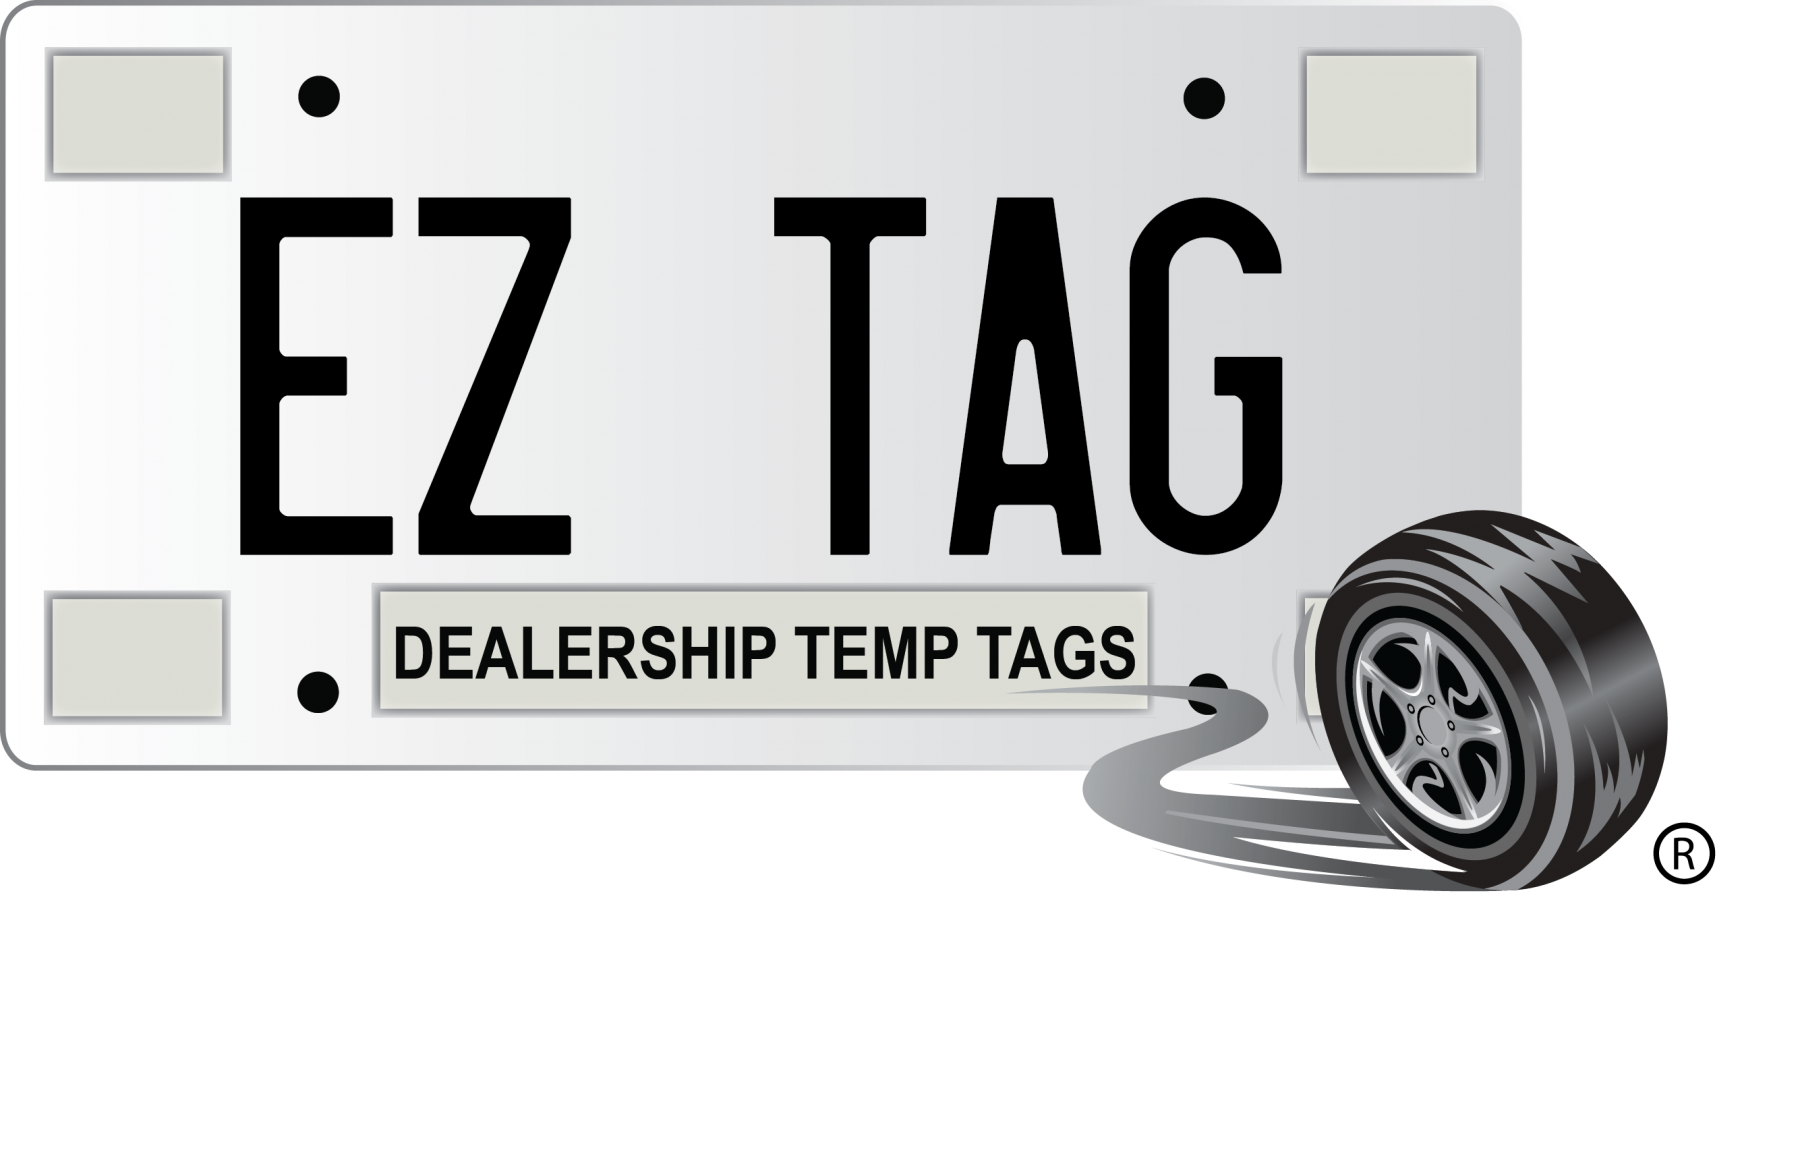 Need Temp tags. Ez deal. Smart Dealer. Drive Dealers. Only tags